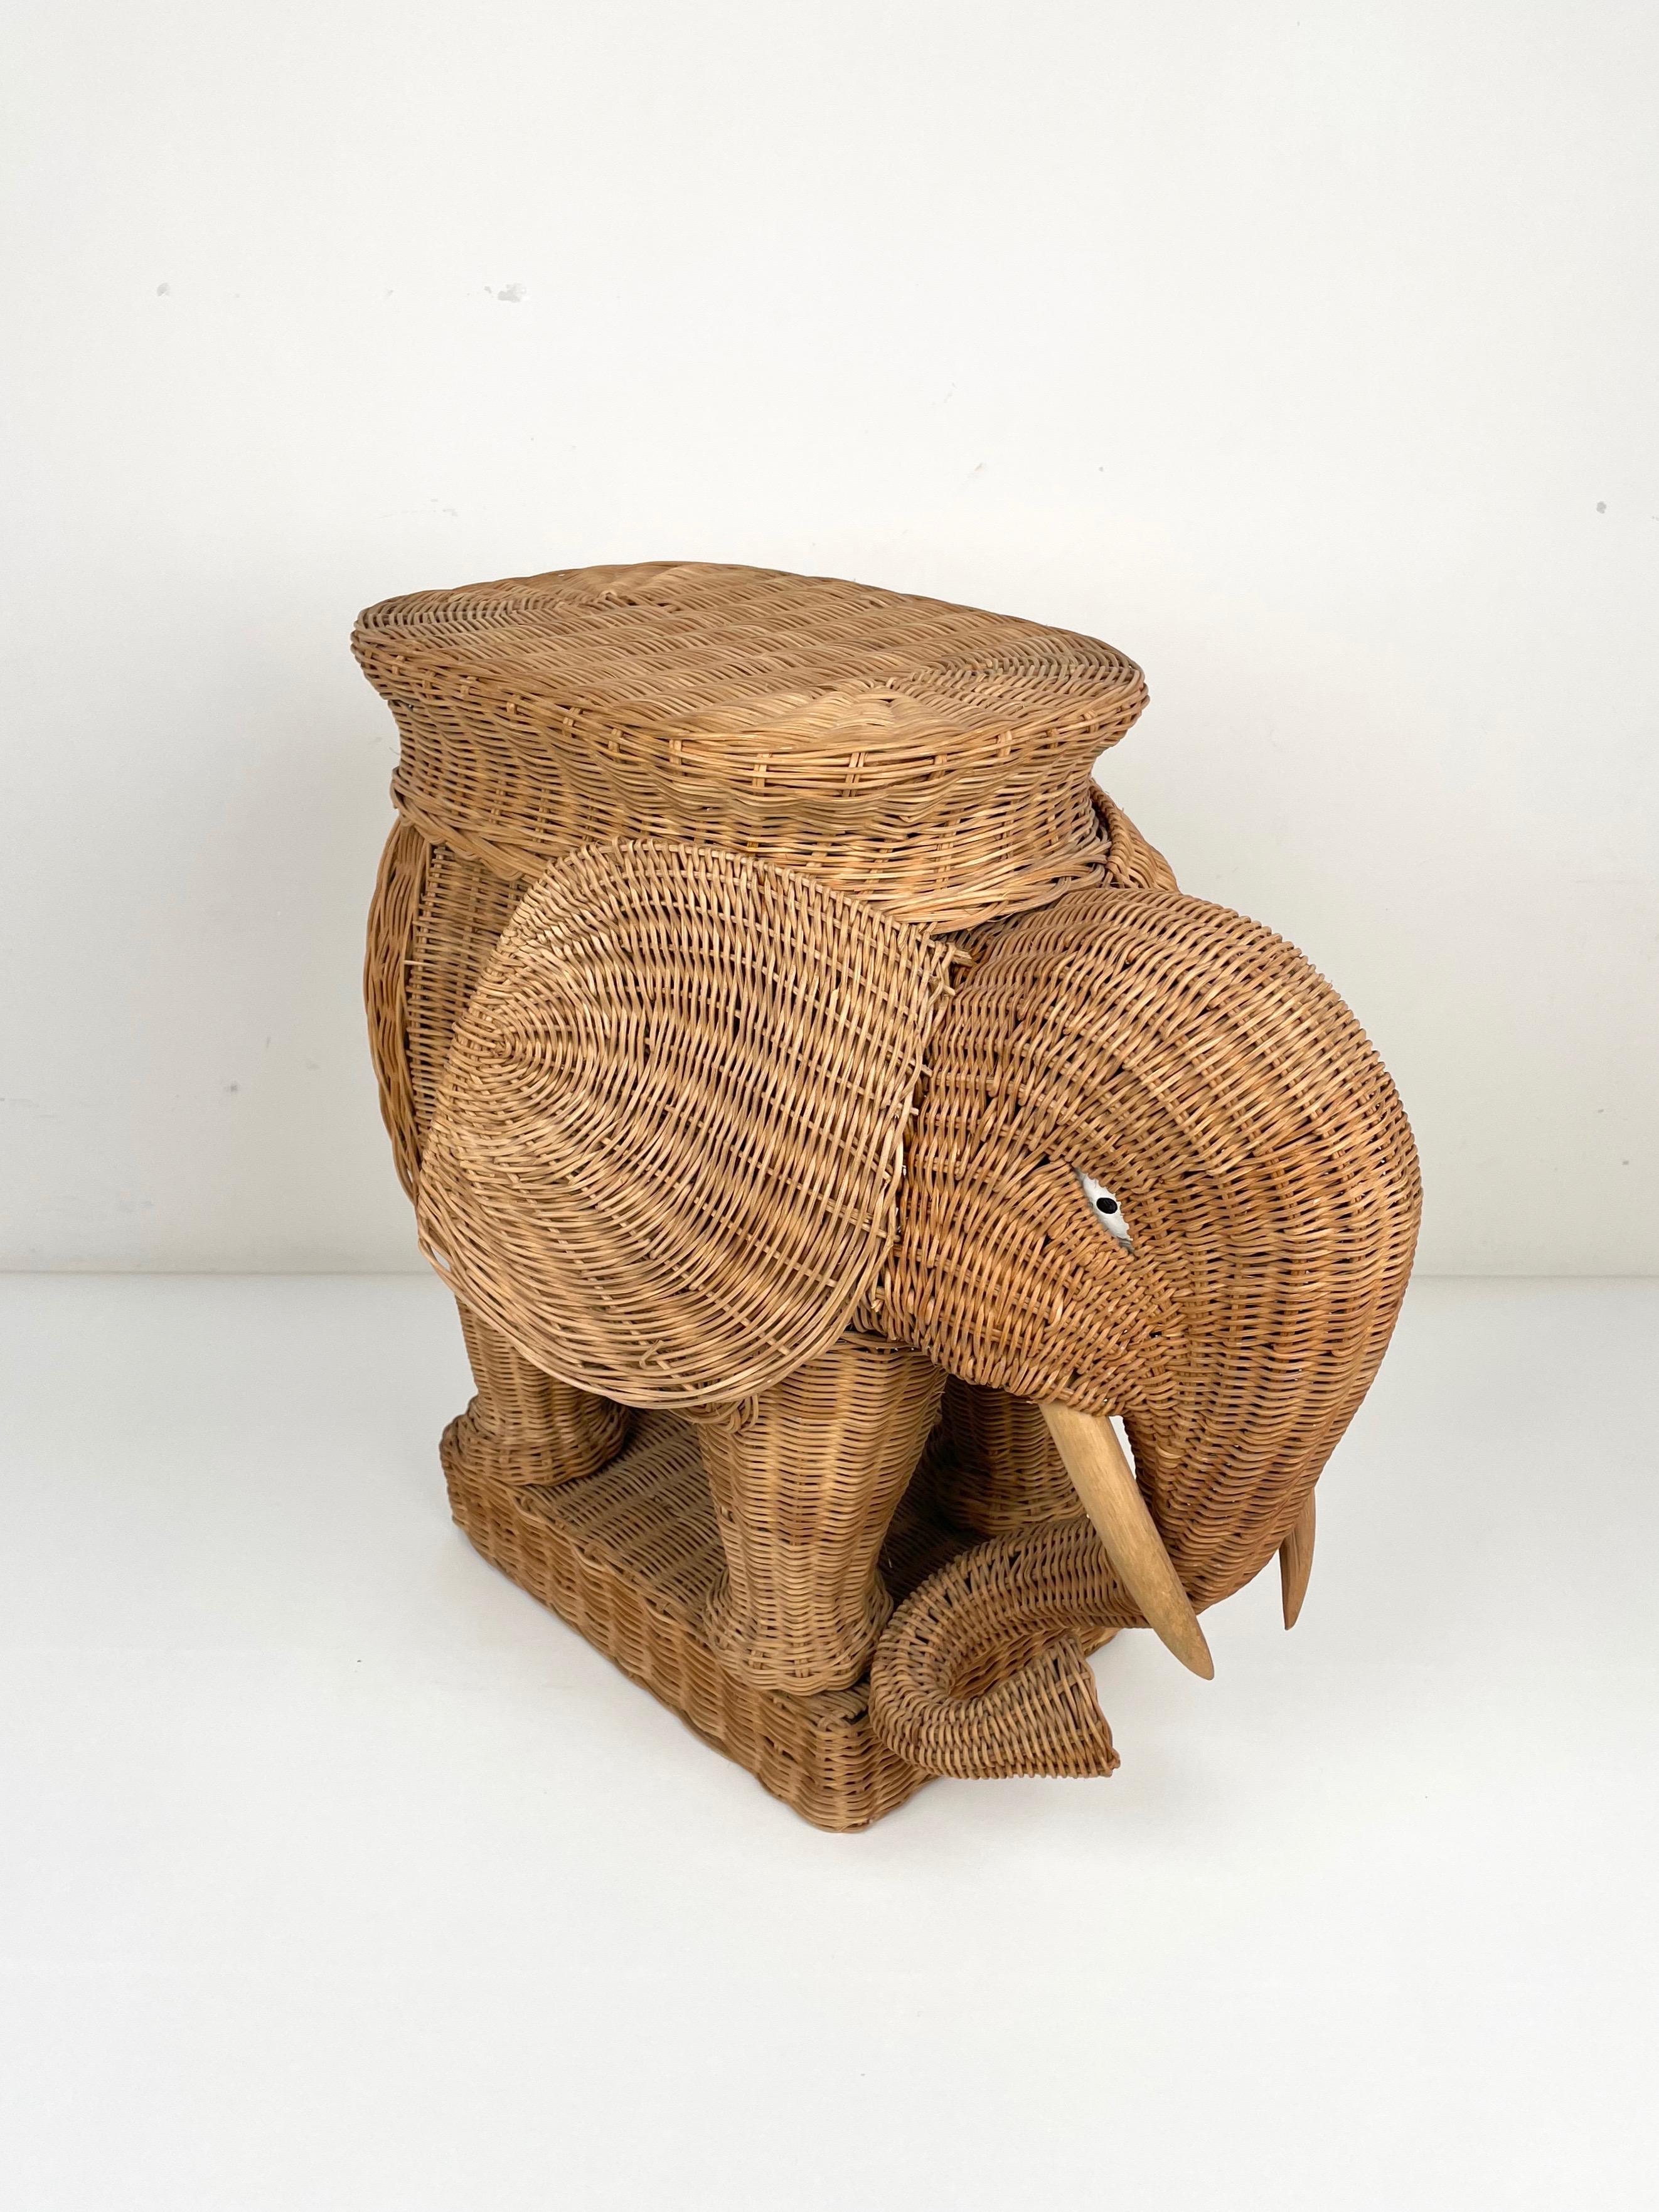 Elephant-shaped end coffee table in hand-braided rattan accented with wood tusks. 

Made in France, 1960s.